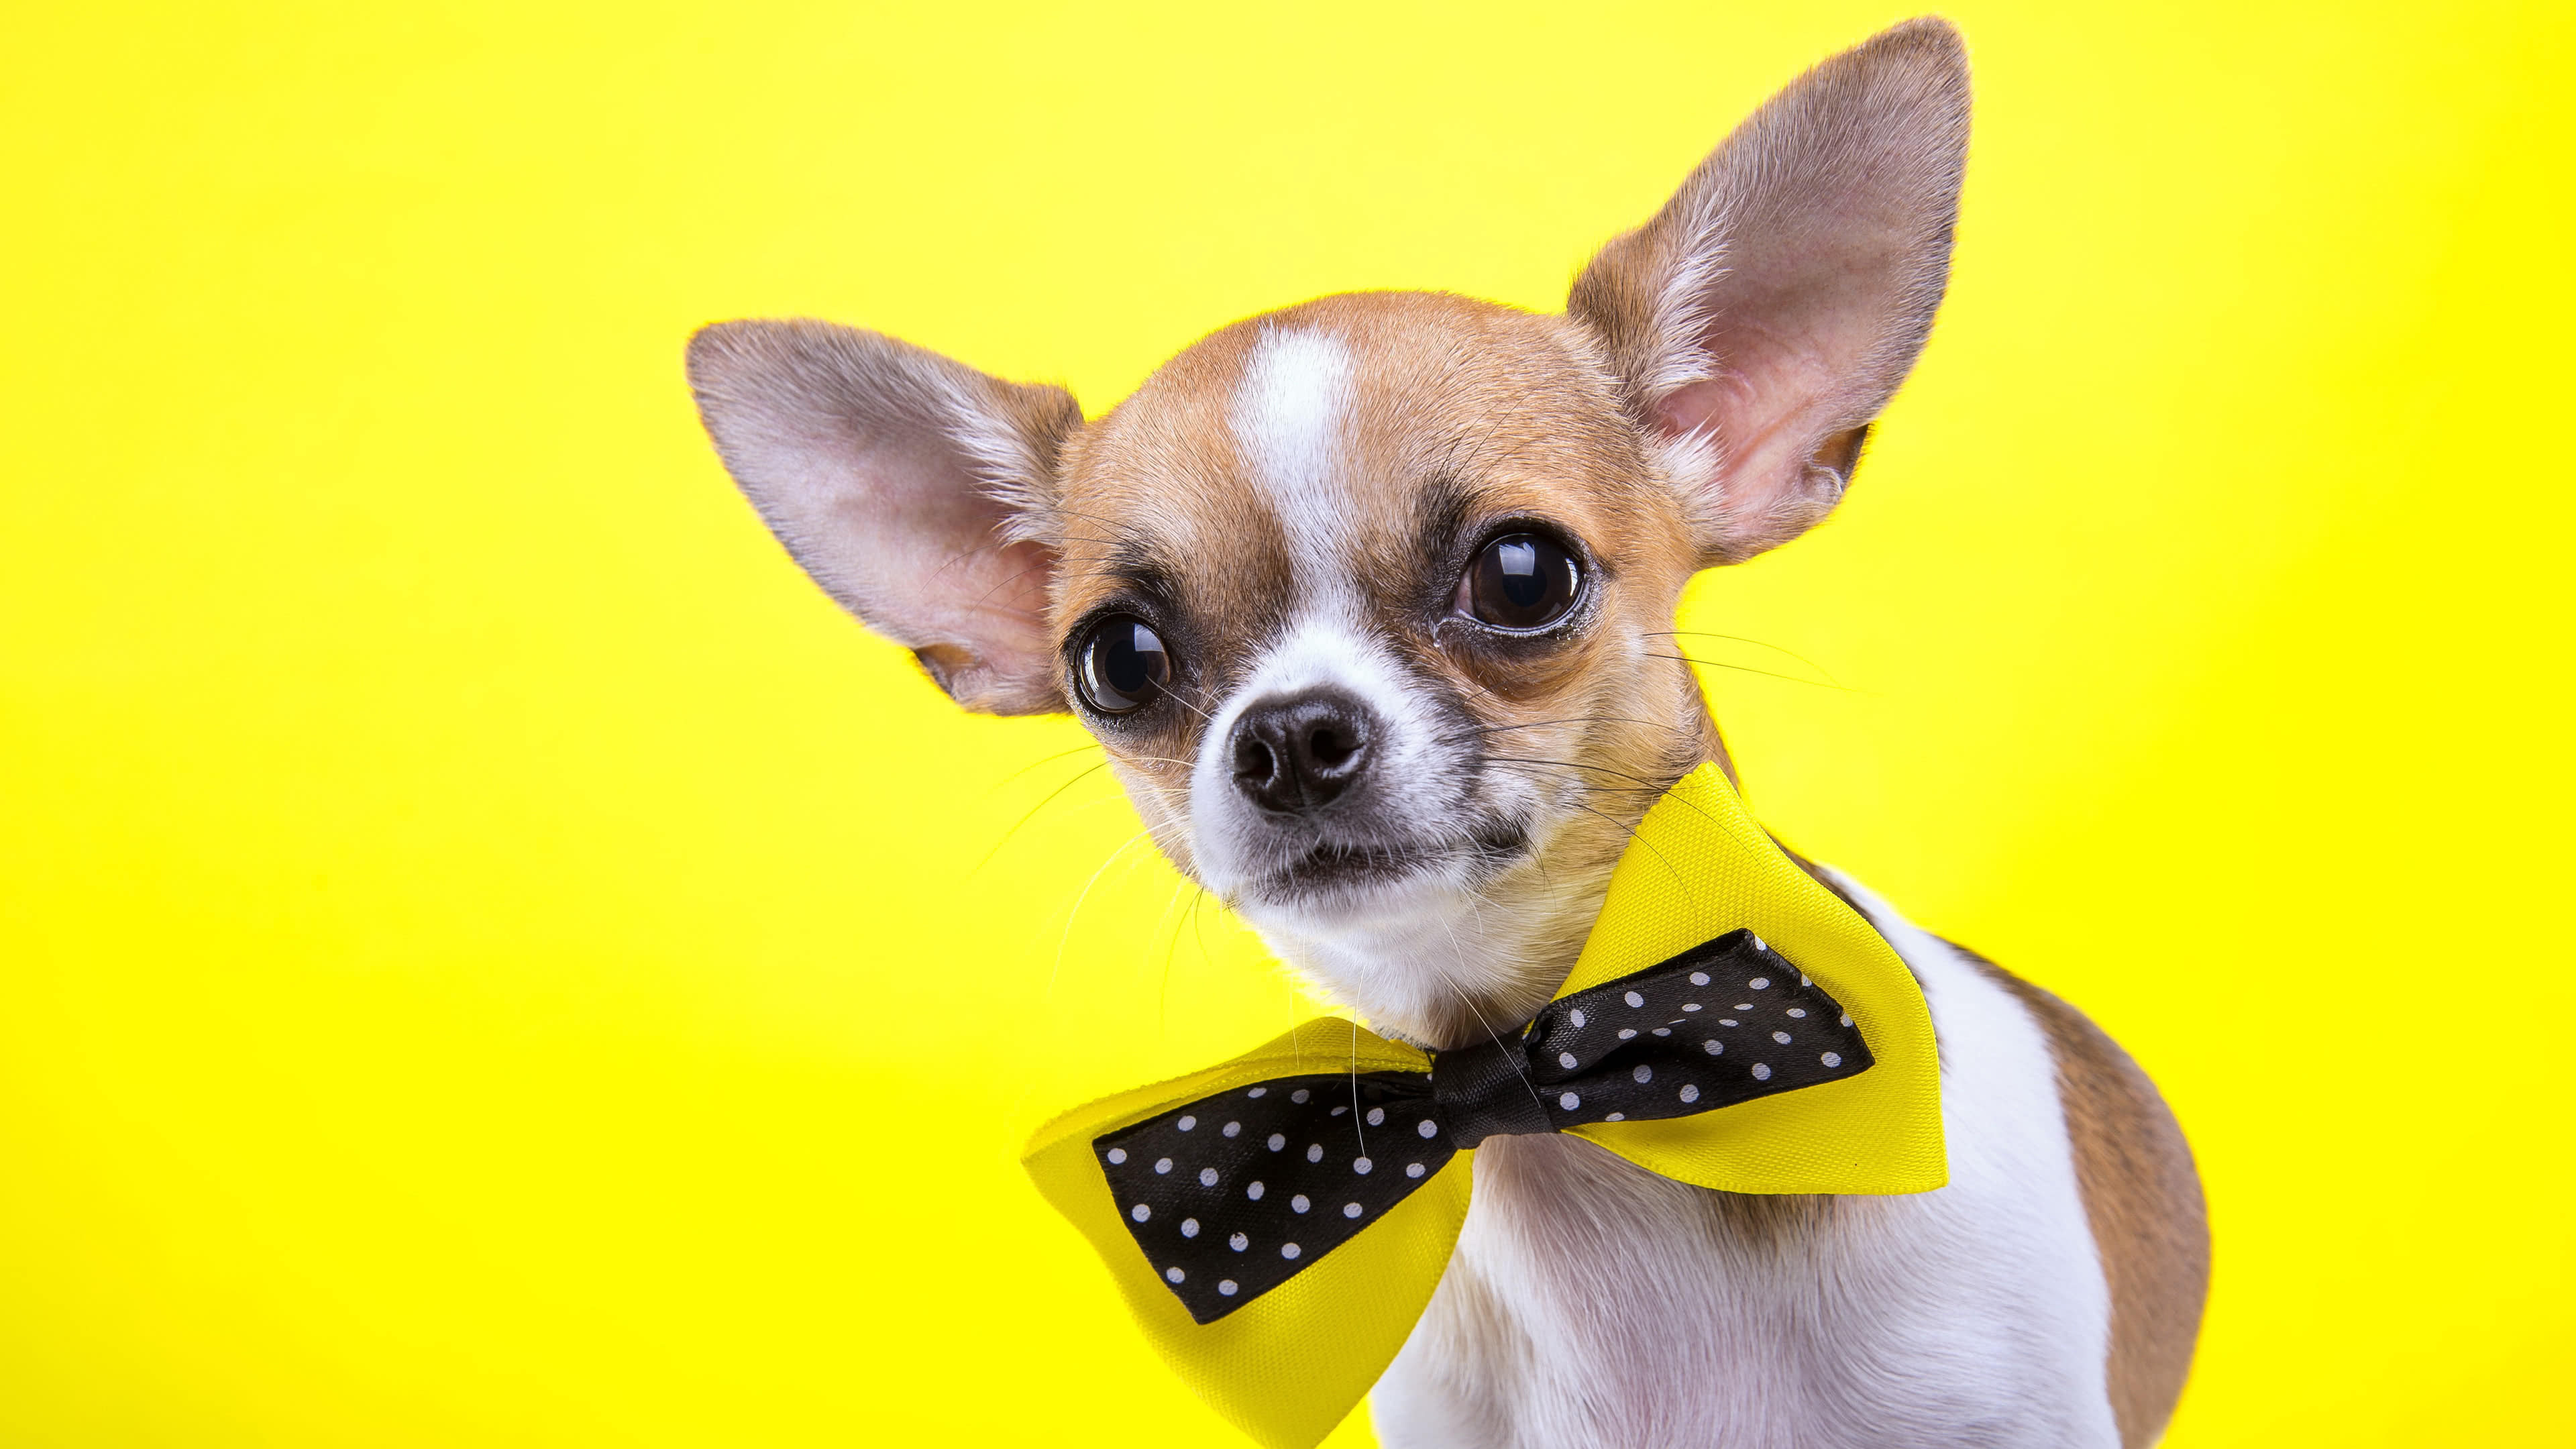 Chihuahua with a bow tie, Classic and stylish, Unique wallpaper, Adorable pet, 3840x2160 4K Desktop